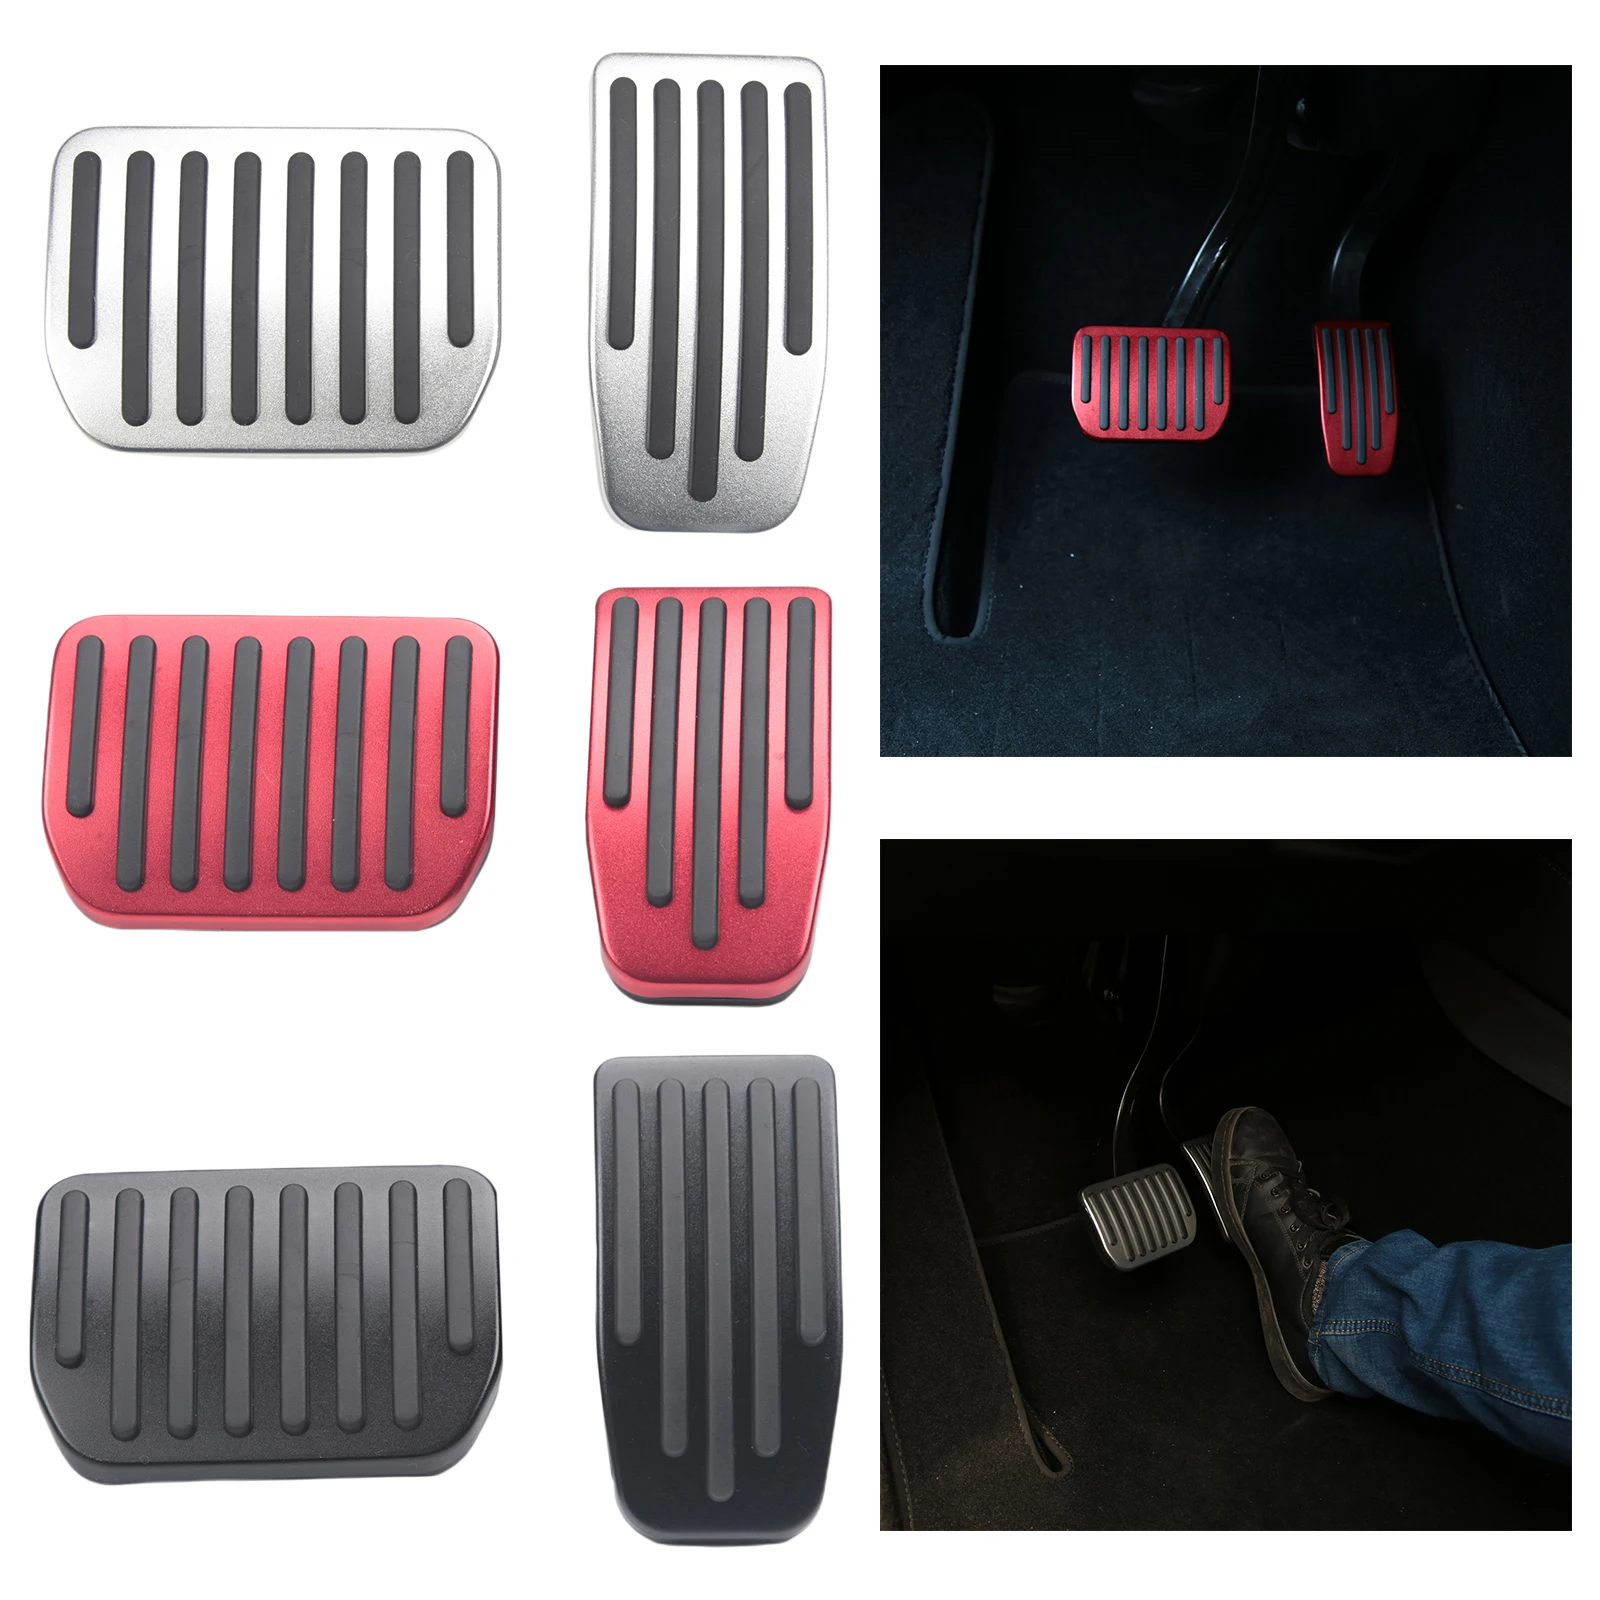 3pcB WANWU Car Gas Fuel Pedal Cover Brake Pedals Rest Pedal Covers for Tesla Model 3 2017 2018 2019 